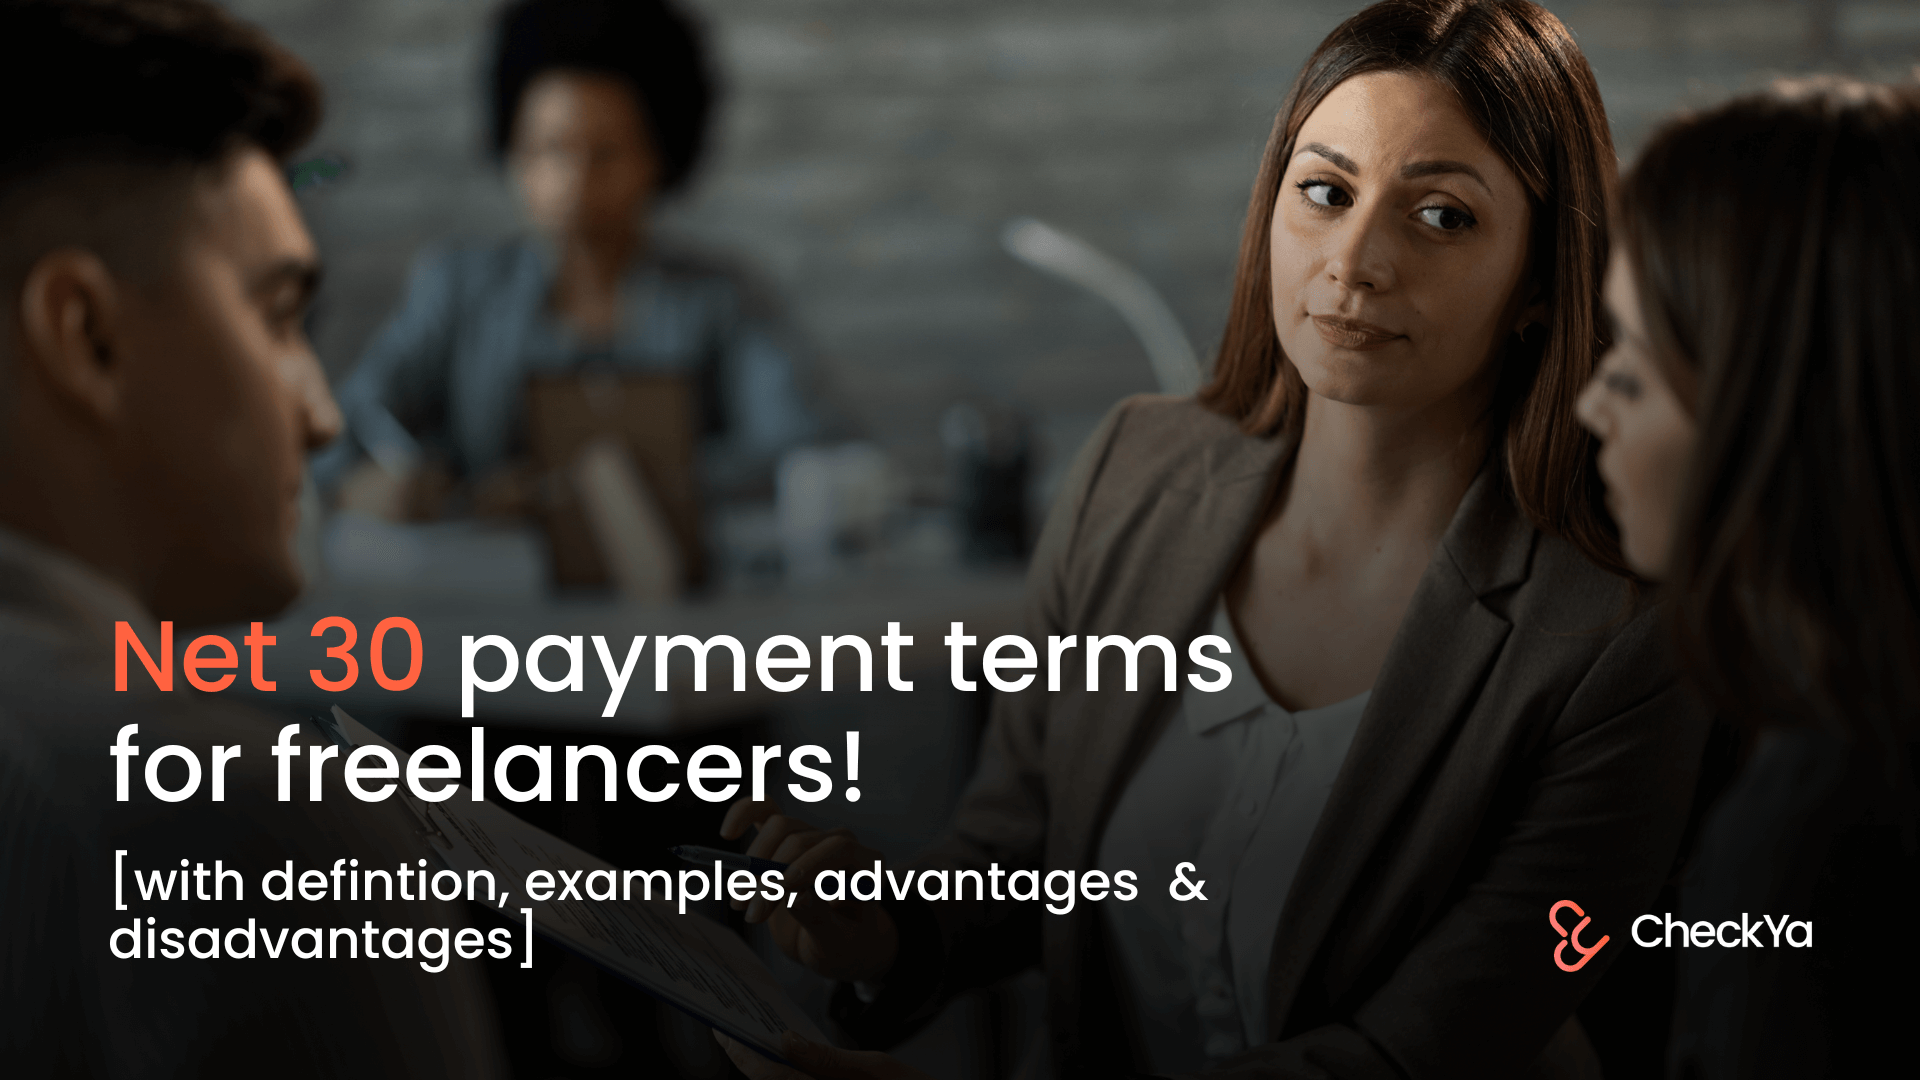 Net 30 Payment Terms For Freelancers! [Examples Included]